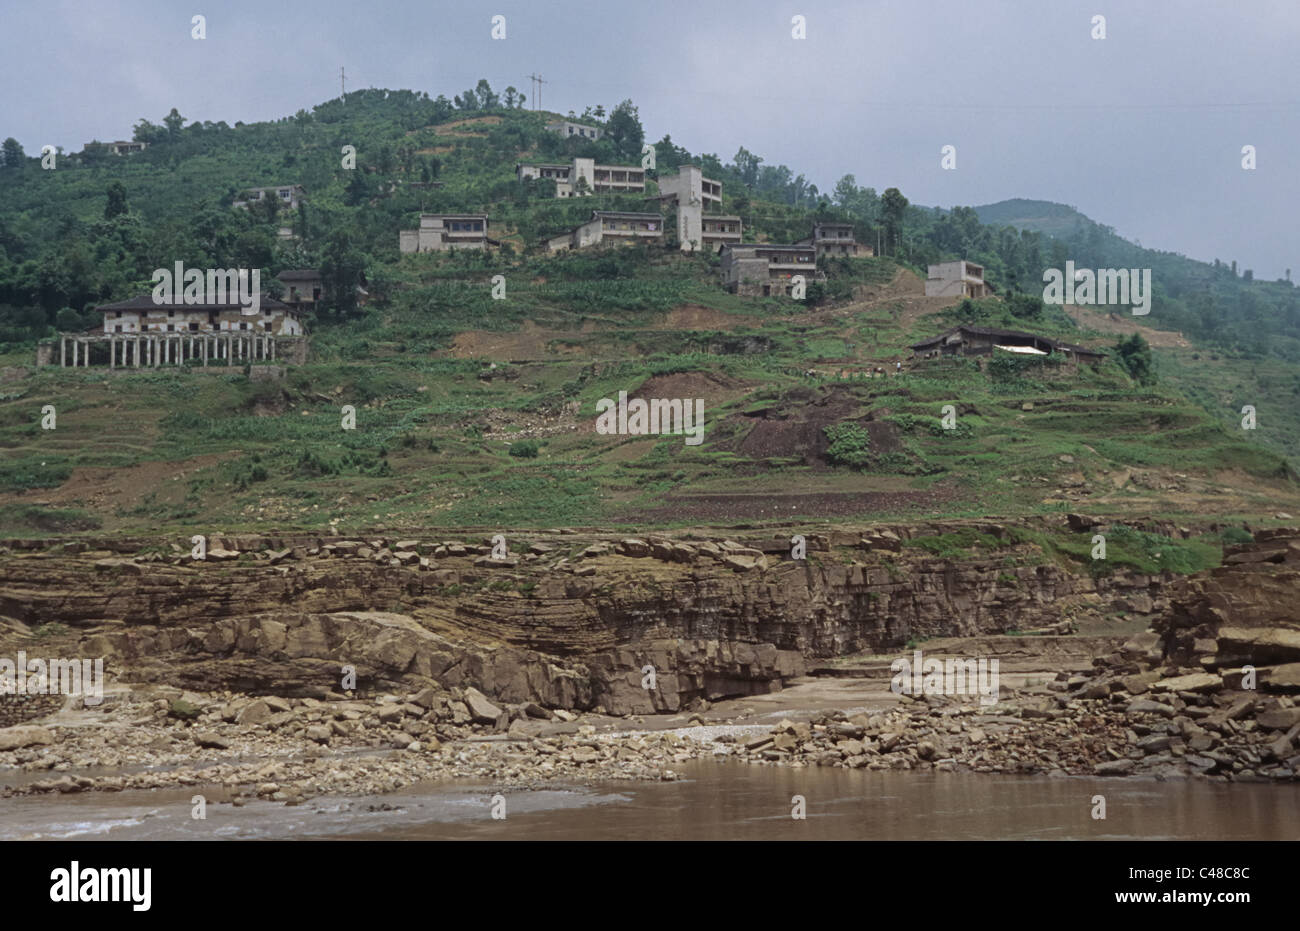 Abandoned and new houses, upriver from Wanxian, Yangtze River, China 990601 1509 Stock Photo